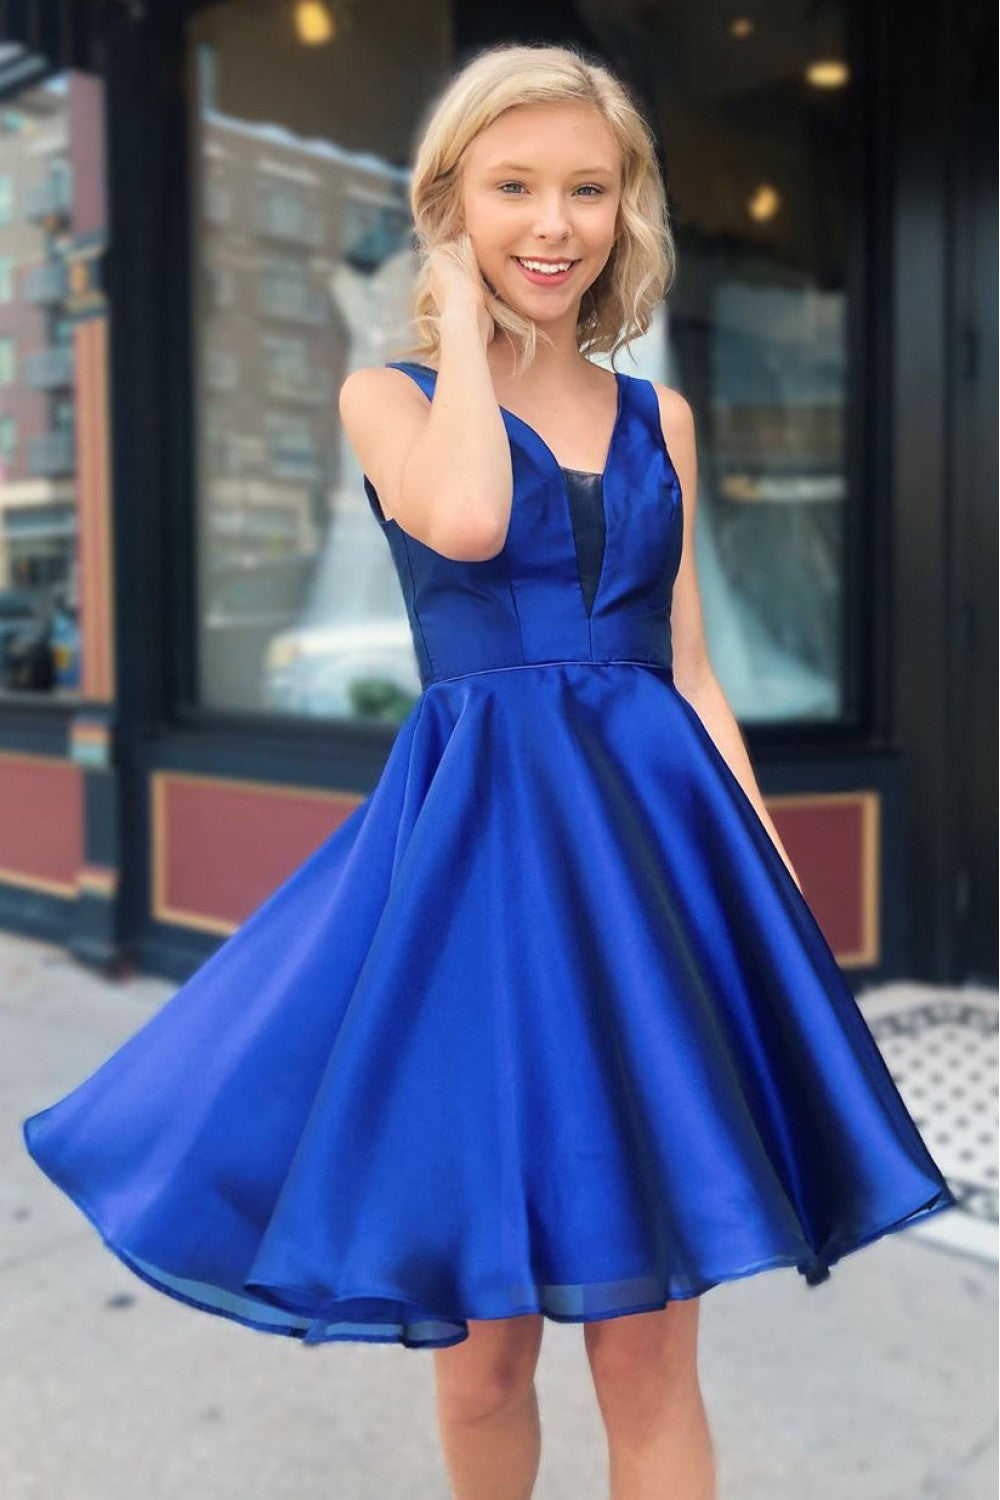 Royal Blue Homecoming Dress, Short Prom Dress ,Winter Formal Dress, Pageant Dance Dresses, Back To School Party Gown, PC0630 - Promcoming